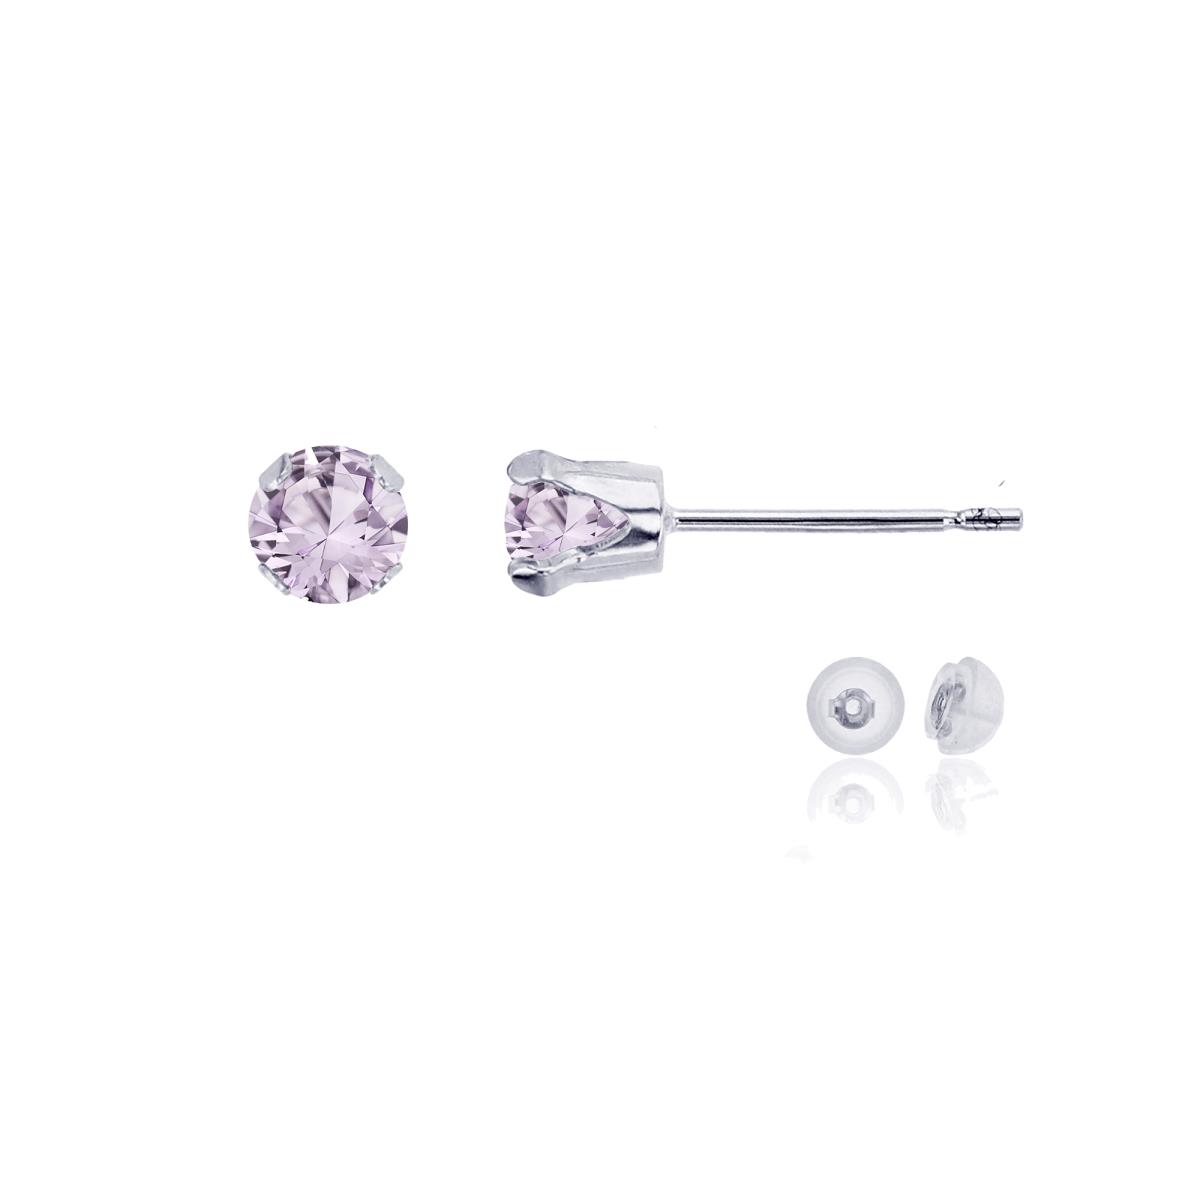 10K White Gold 4mm Round Rose De France Stud Earring with Silicone Back